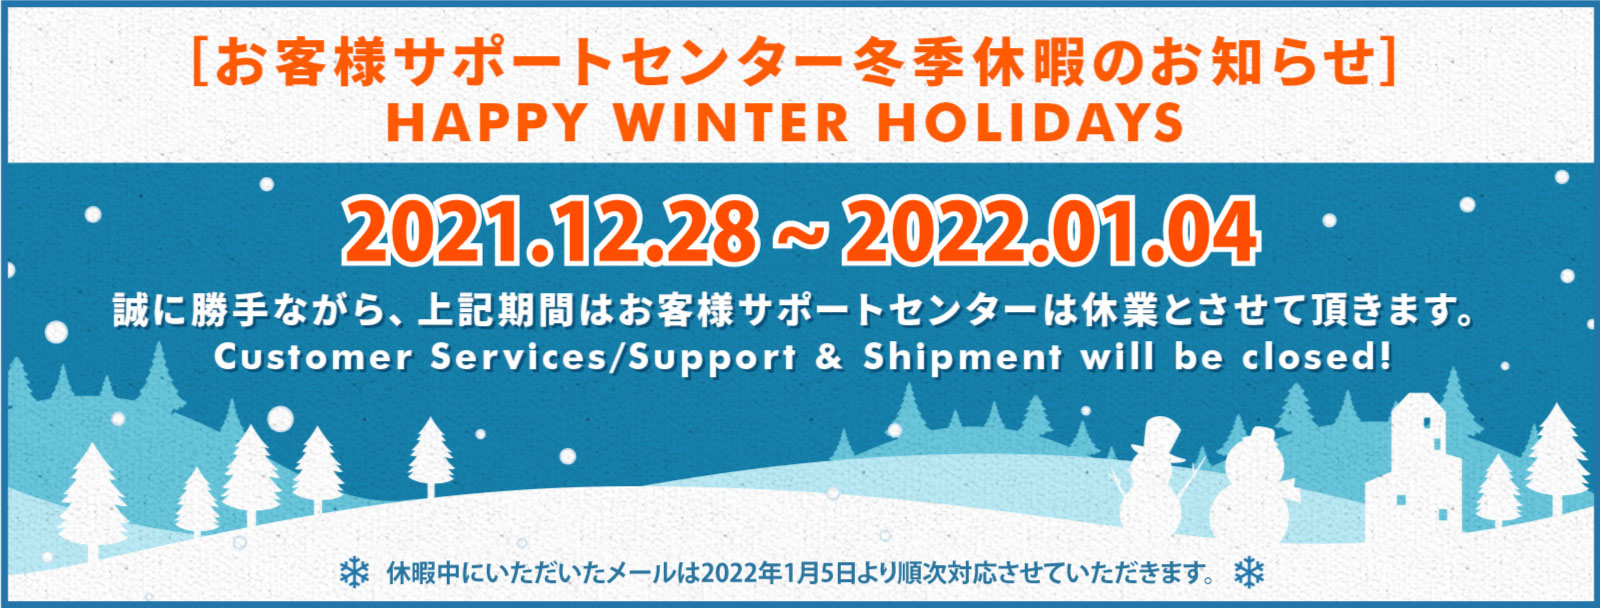 Winter Holiday Announcement